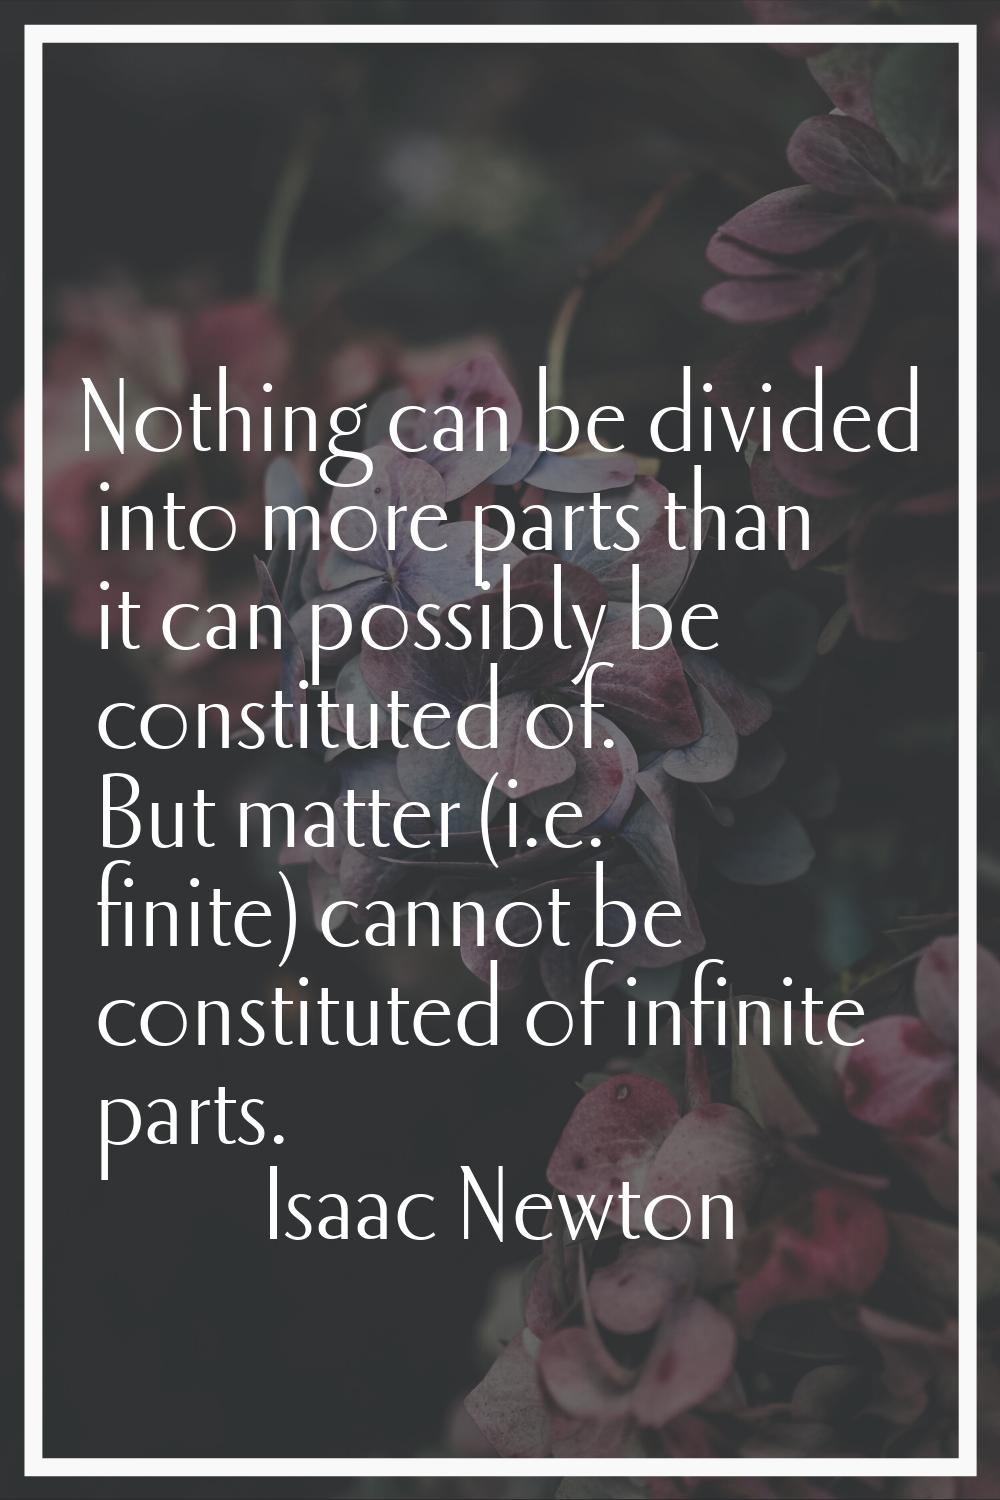 Nothing can be divided into more parts than it can possibly be constituted of. But matter (i.e. fin